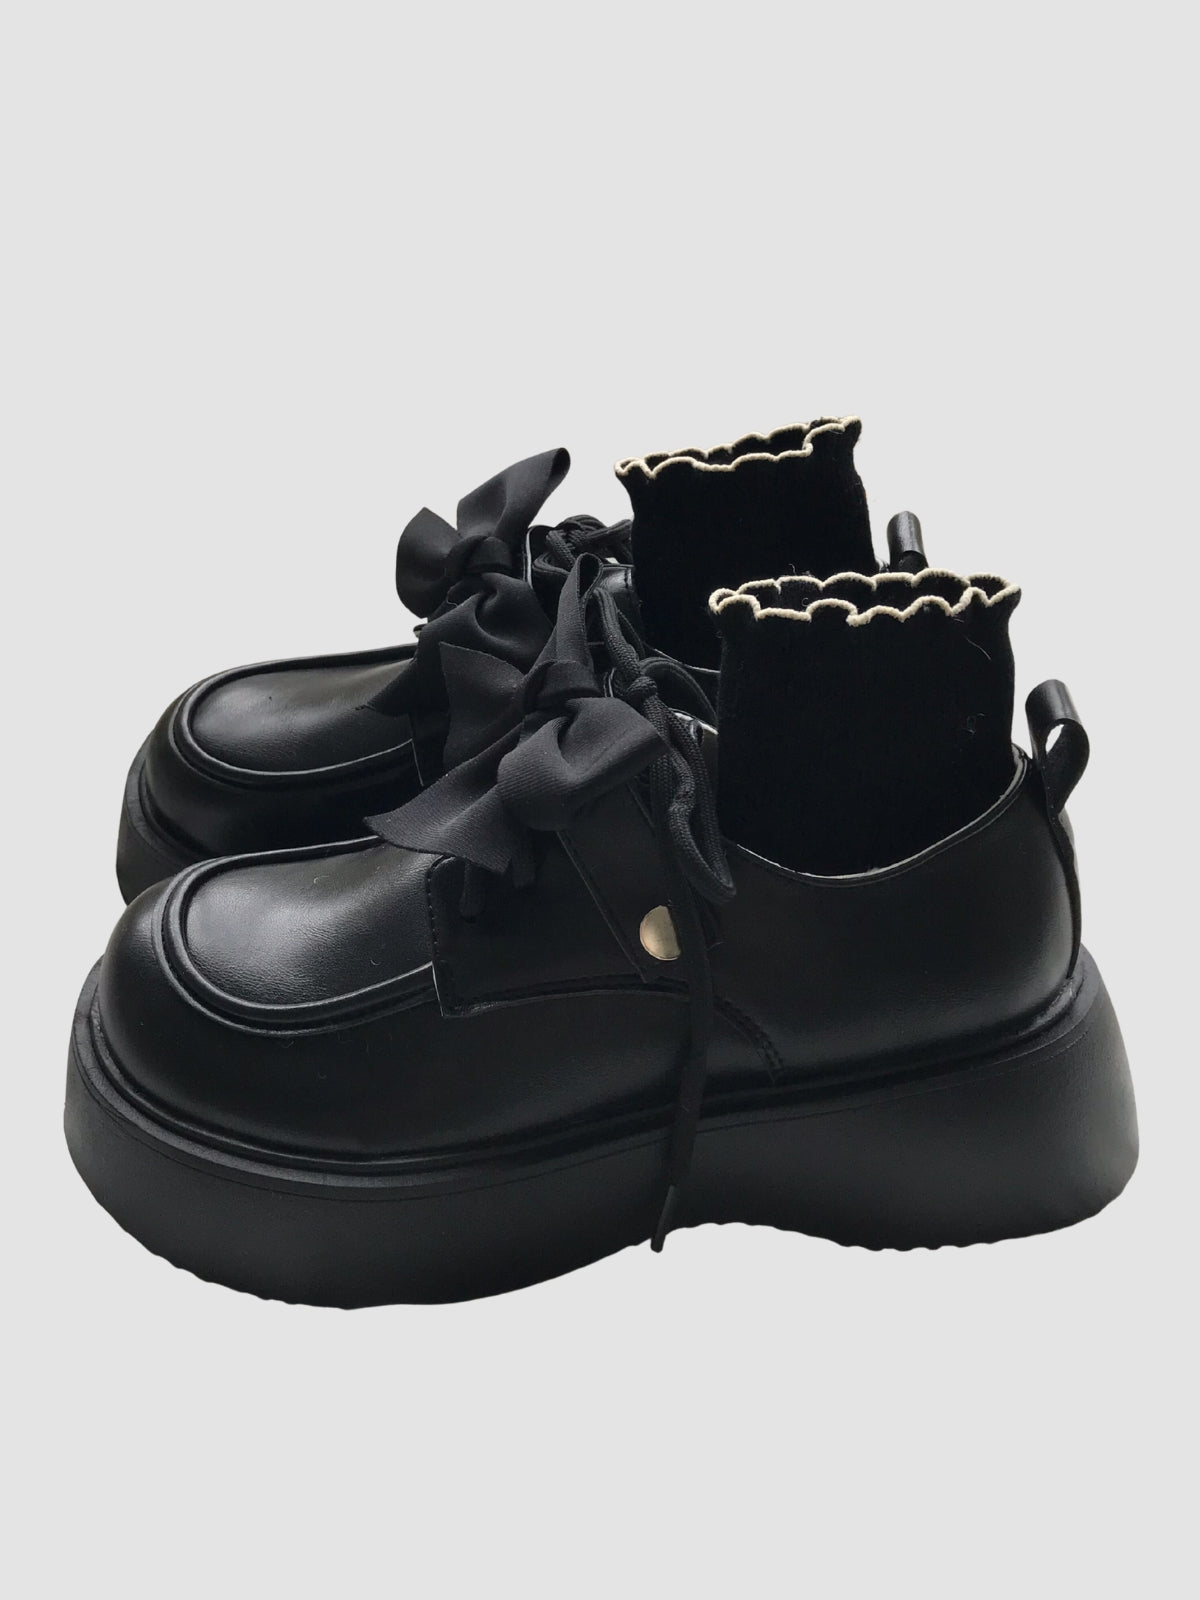 WLS Cute Bow Retro Leather Women Shoes